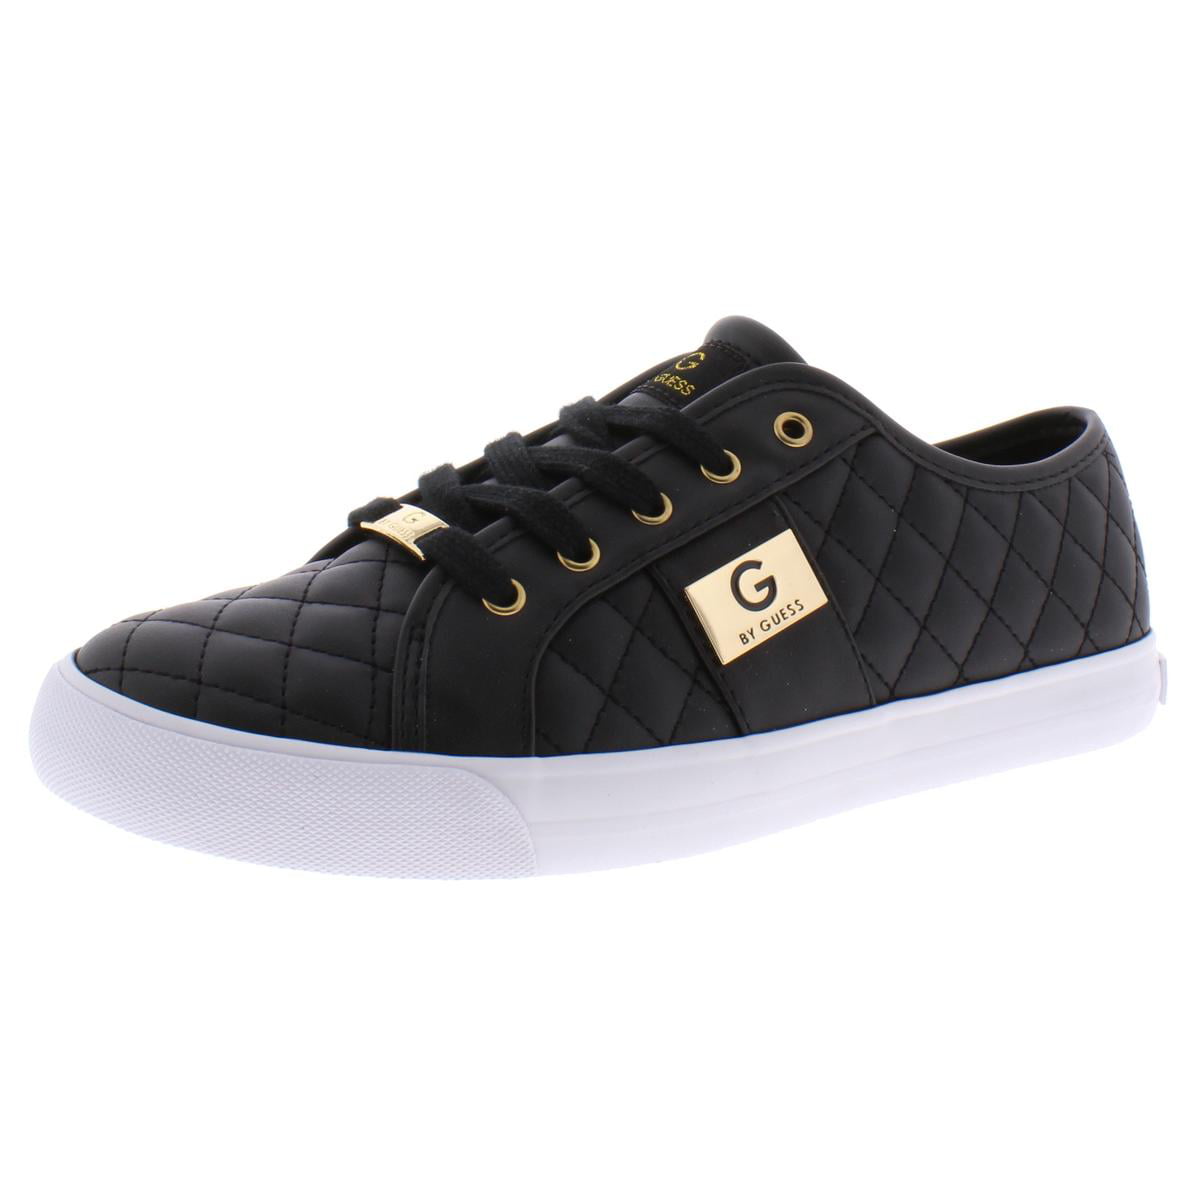 G by Guess Women's Backer2 Lace Up Leather Quilted Pattern Sneakers Shoes Black 